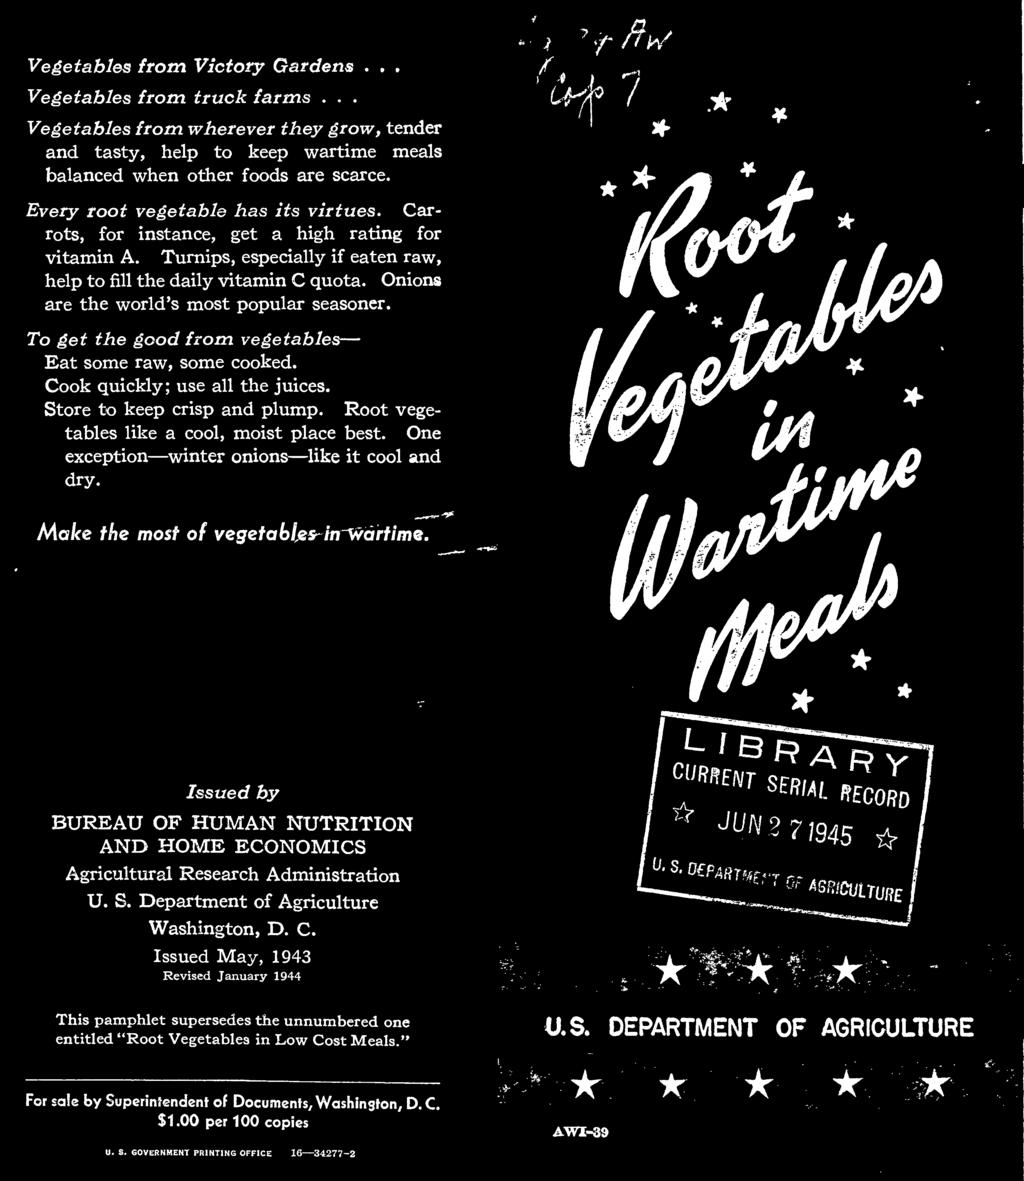 One exception winter onions like it cool and dry. Make the most of vegetables in wartime.